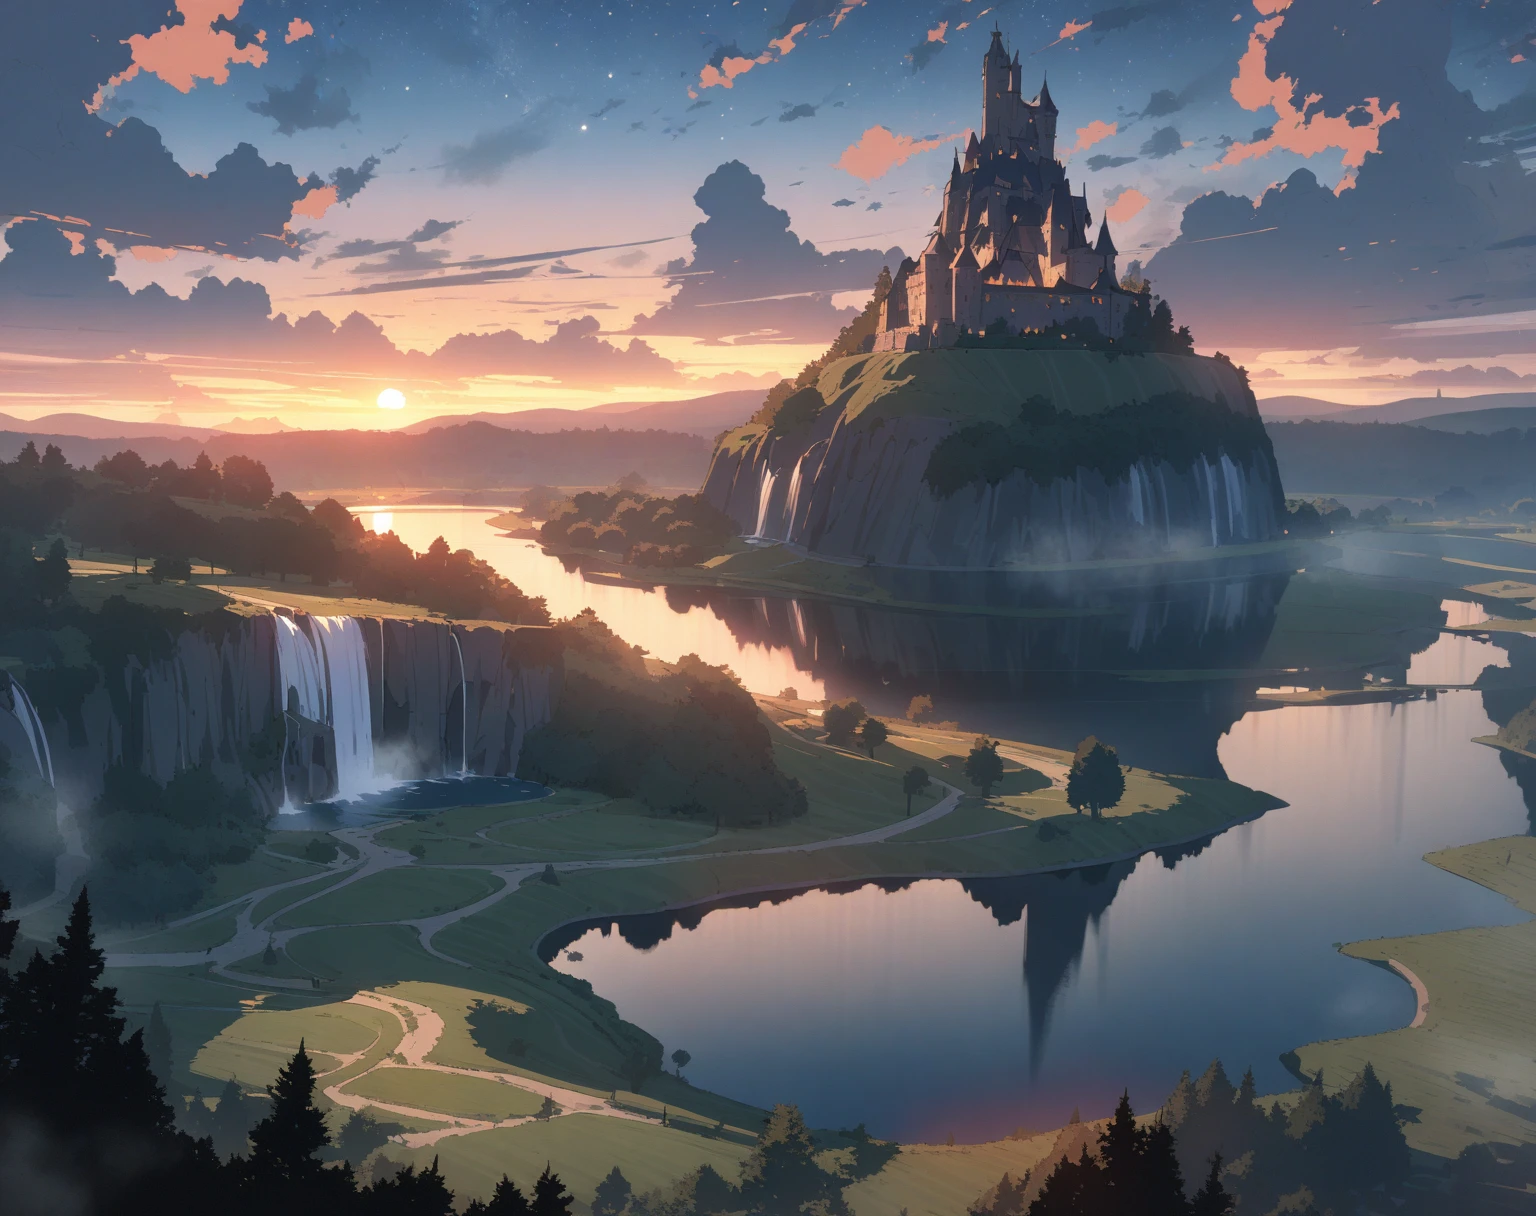 (Masterpiece, best quality, highres, up close) {{Artist: Sincos}} castle on hill, waterfall to the left, above lake, dawn, stars, clouds, fantasy setting.
